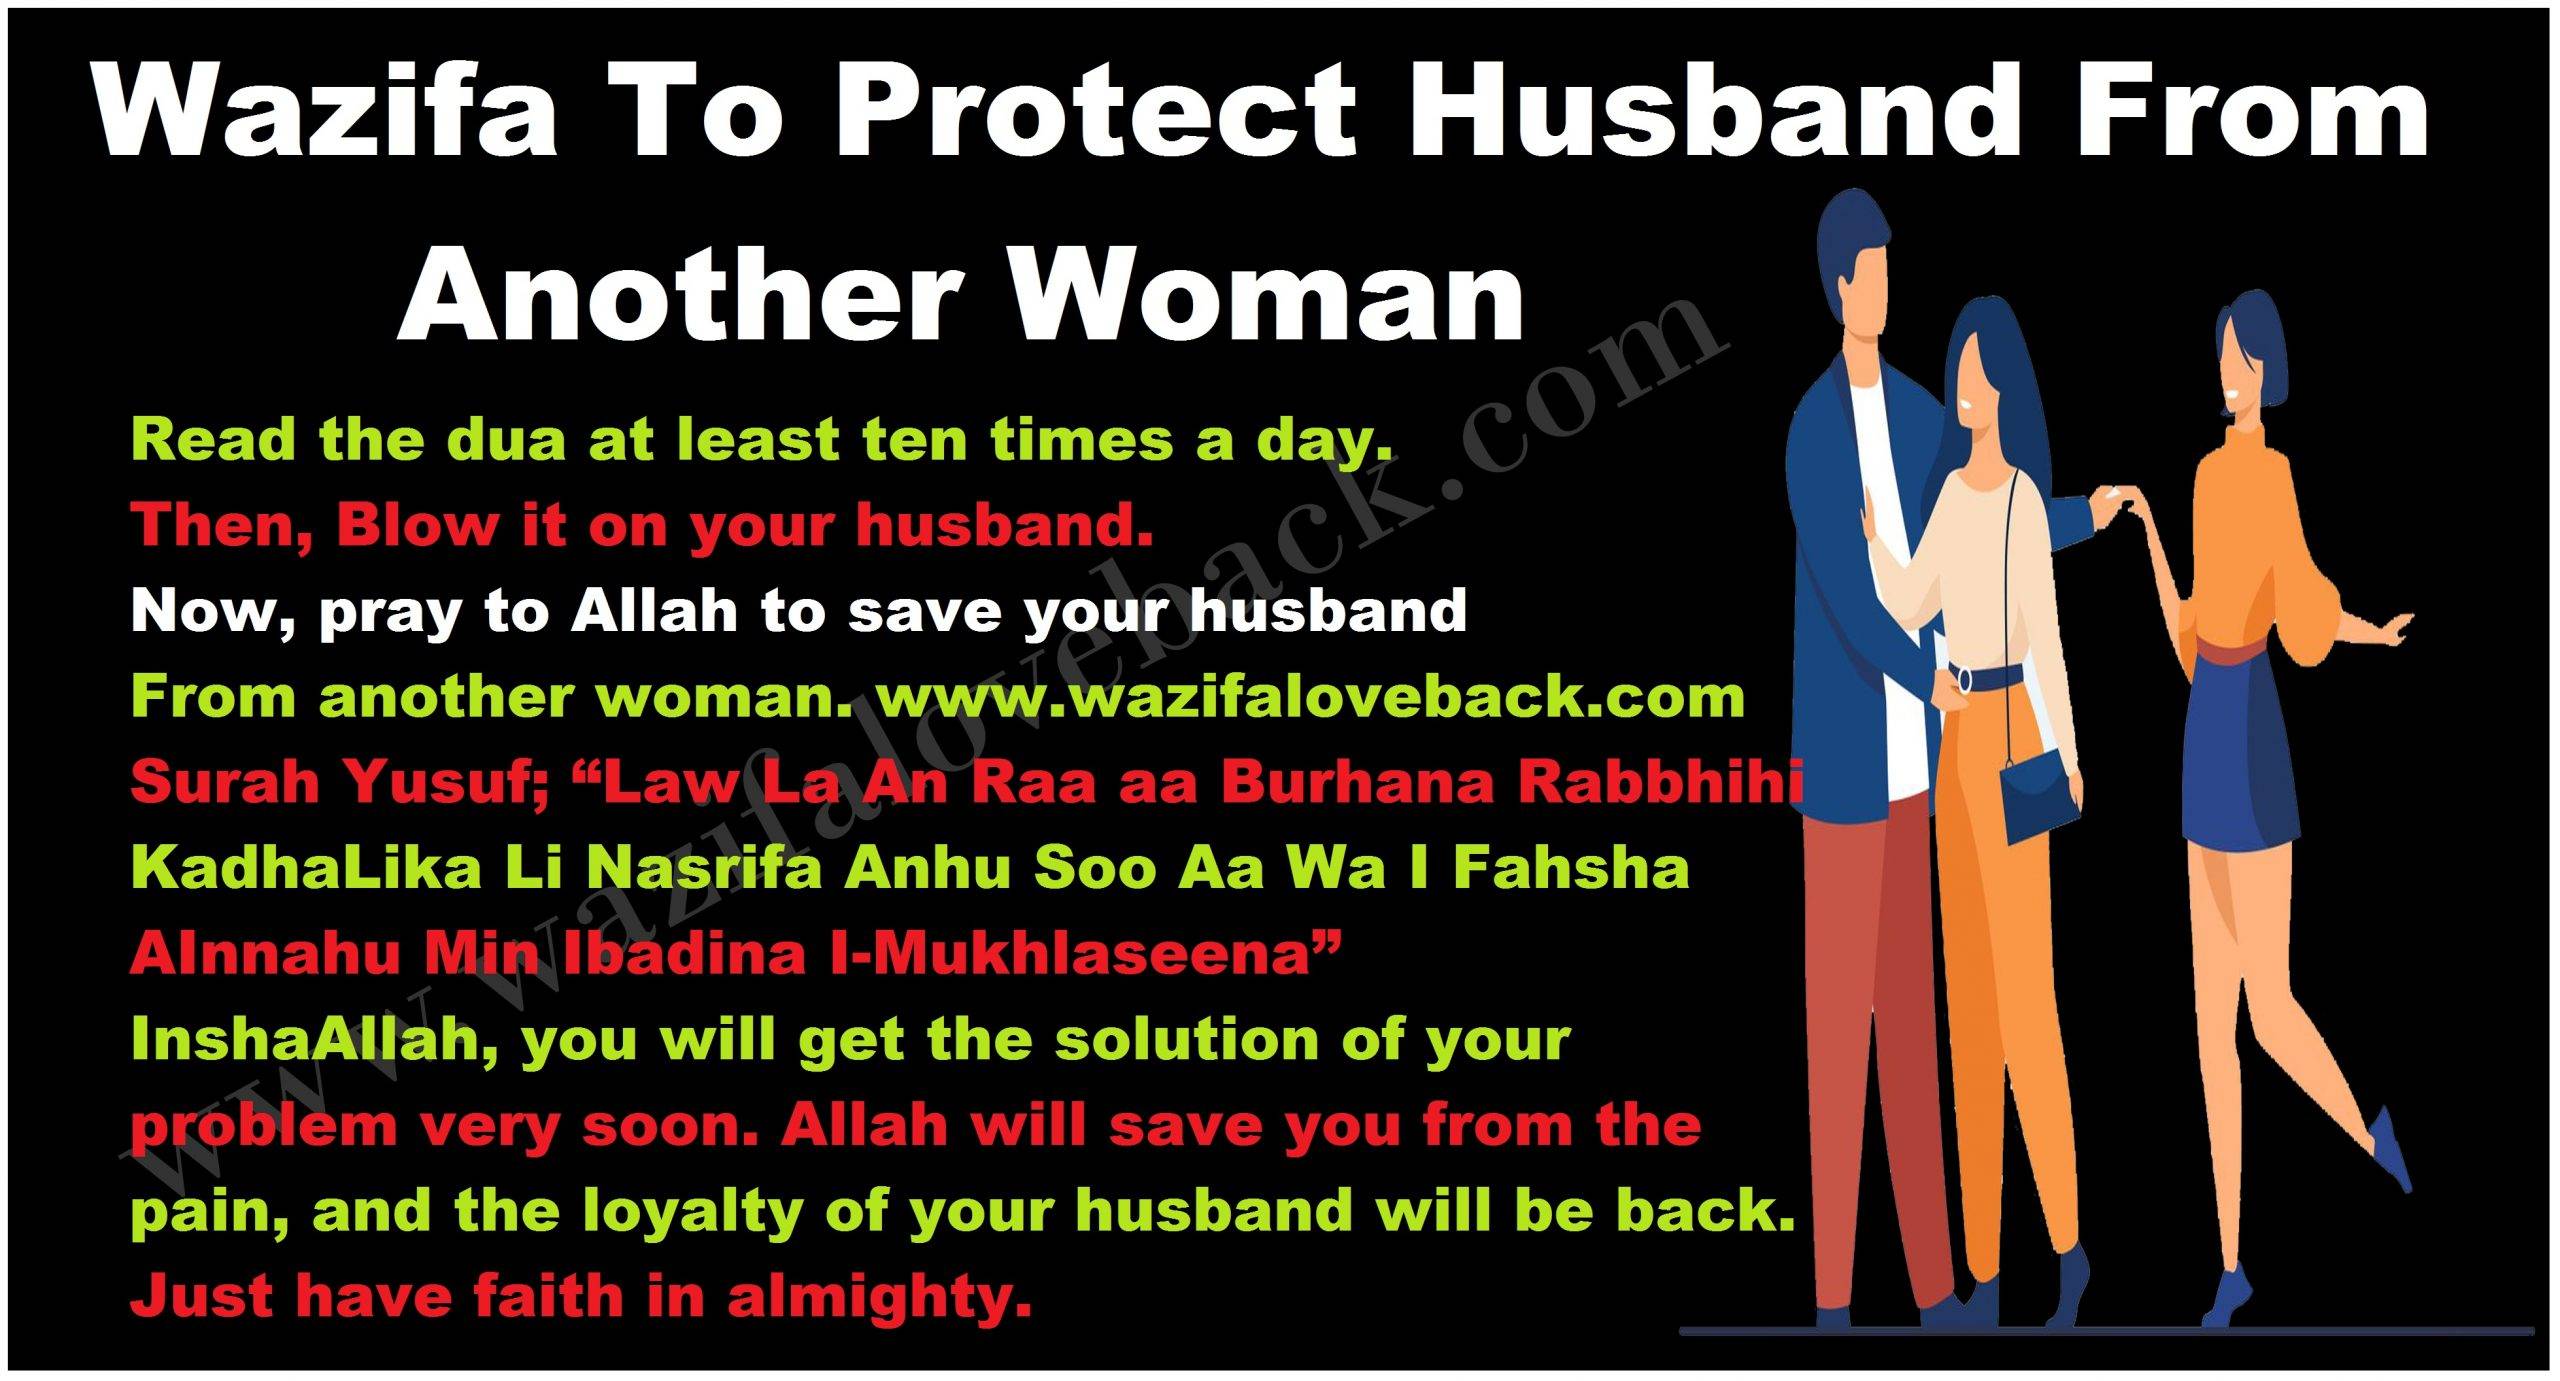 Wazifa To Protect Husband From Another Woman